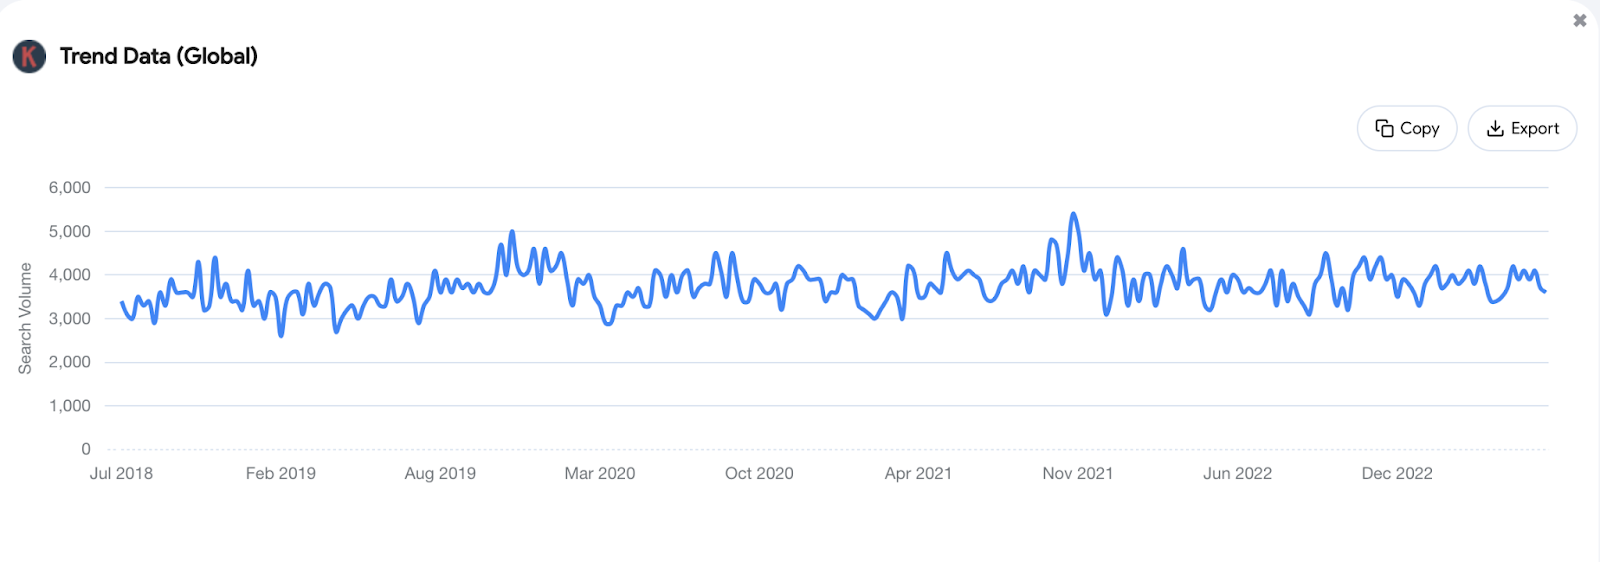 Searches for “smart factory” have risen over the past 5 years, peaking in November 2021